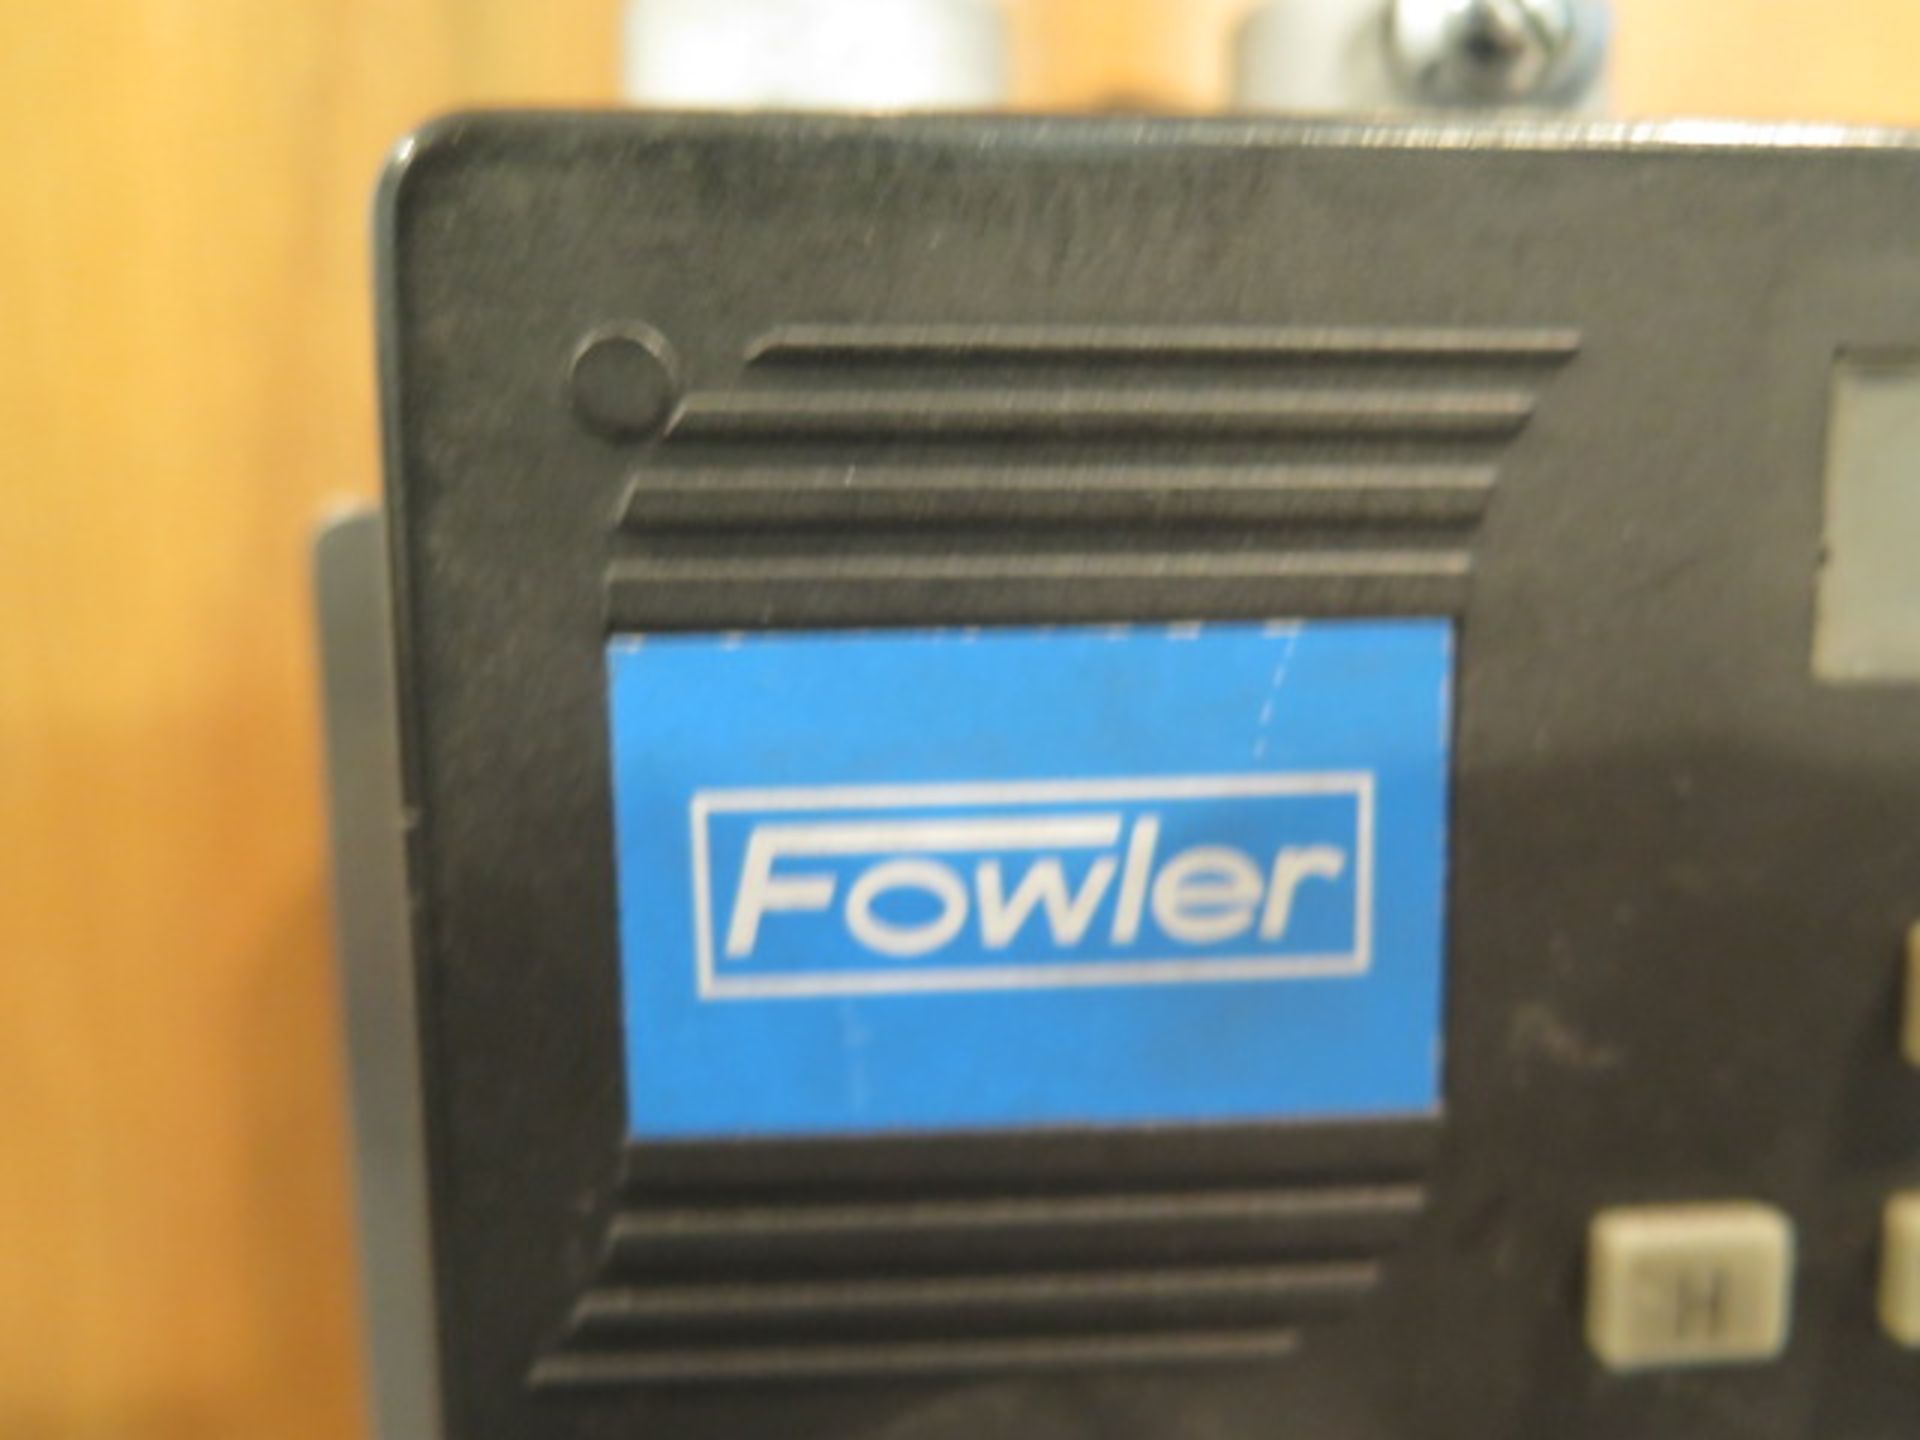 Fowler 12" Digital Height Gage (SOLD AS-IS - NO WARRANTY) - Image 5 of 5